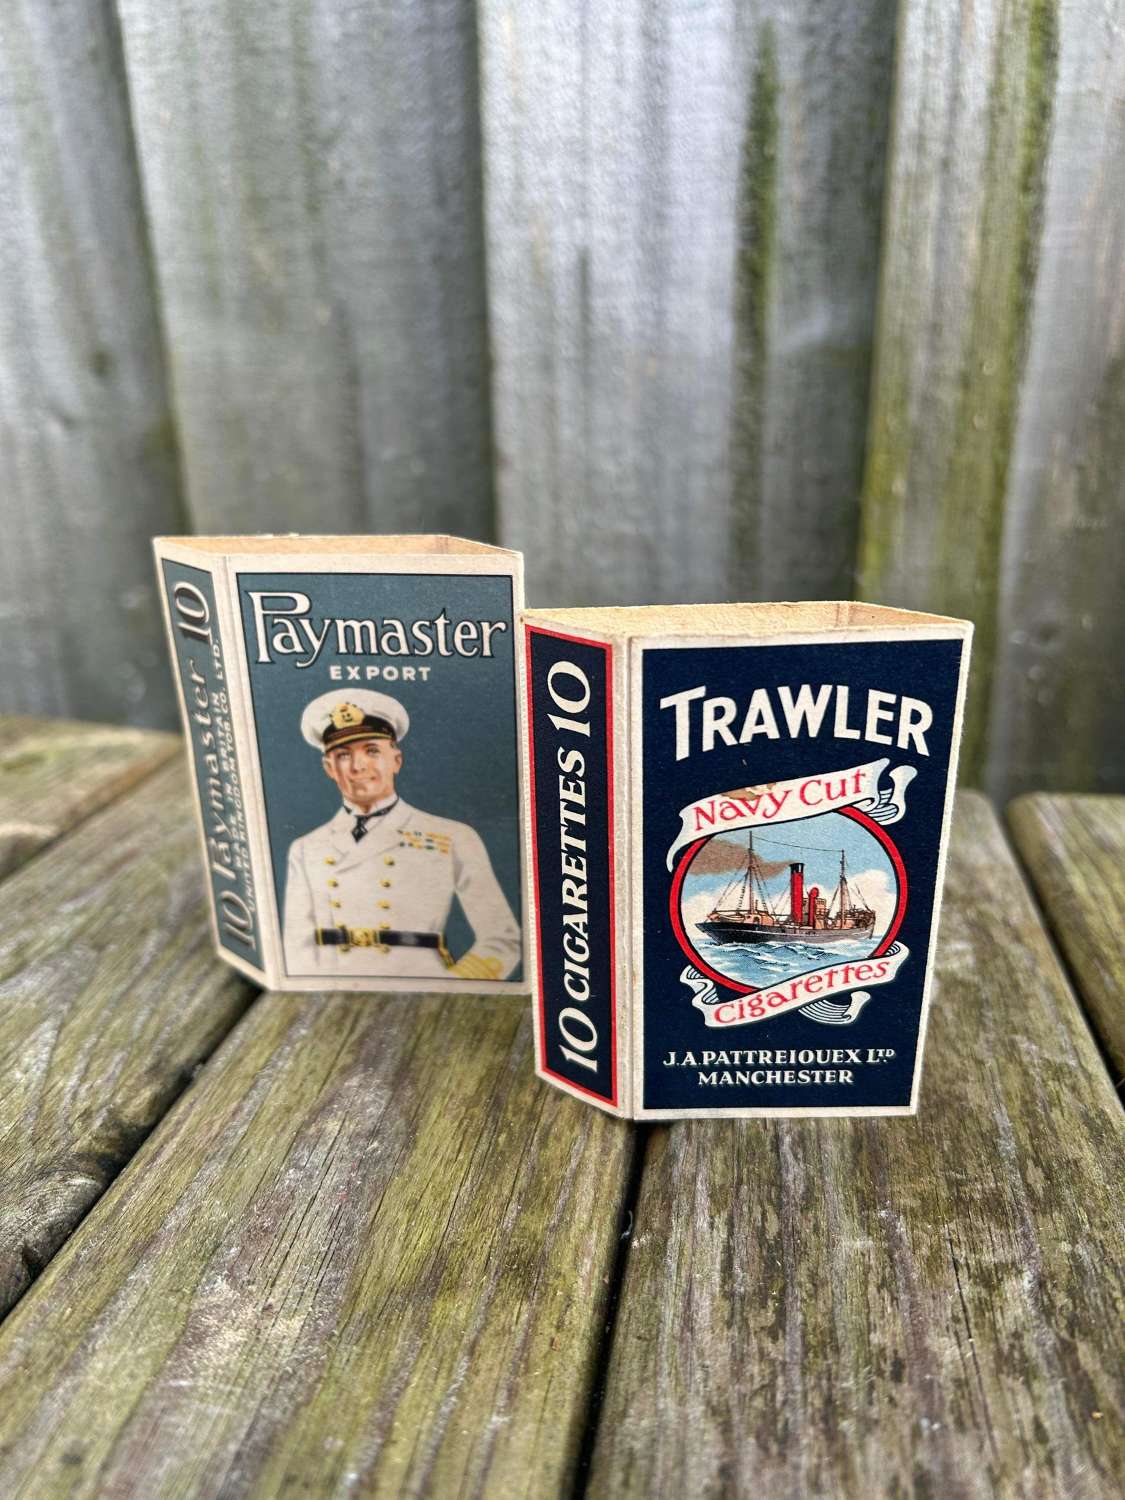 Paymaster and trawler cigarette packet